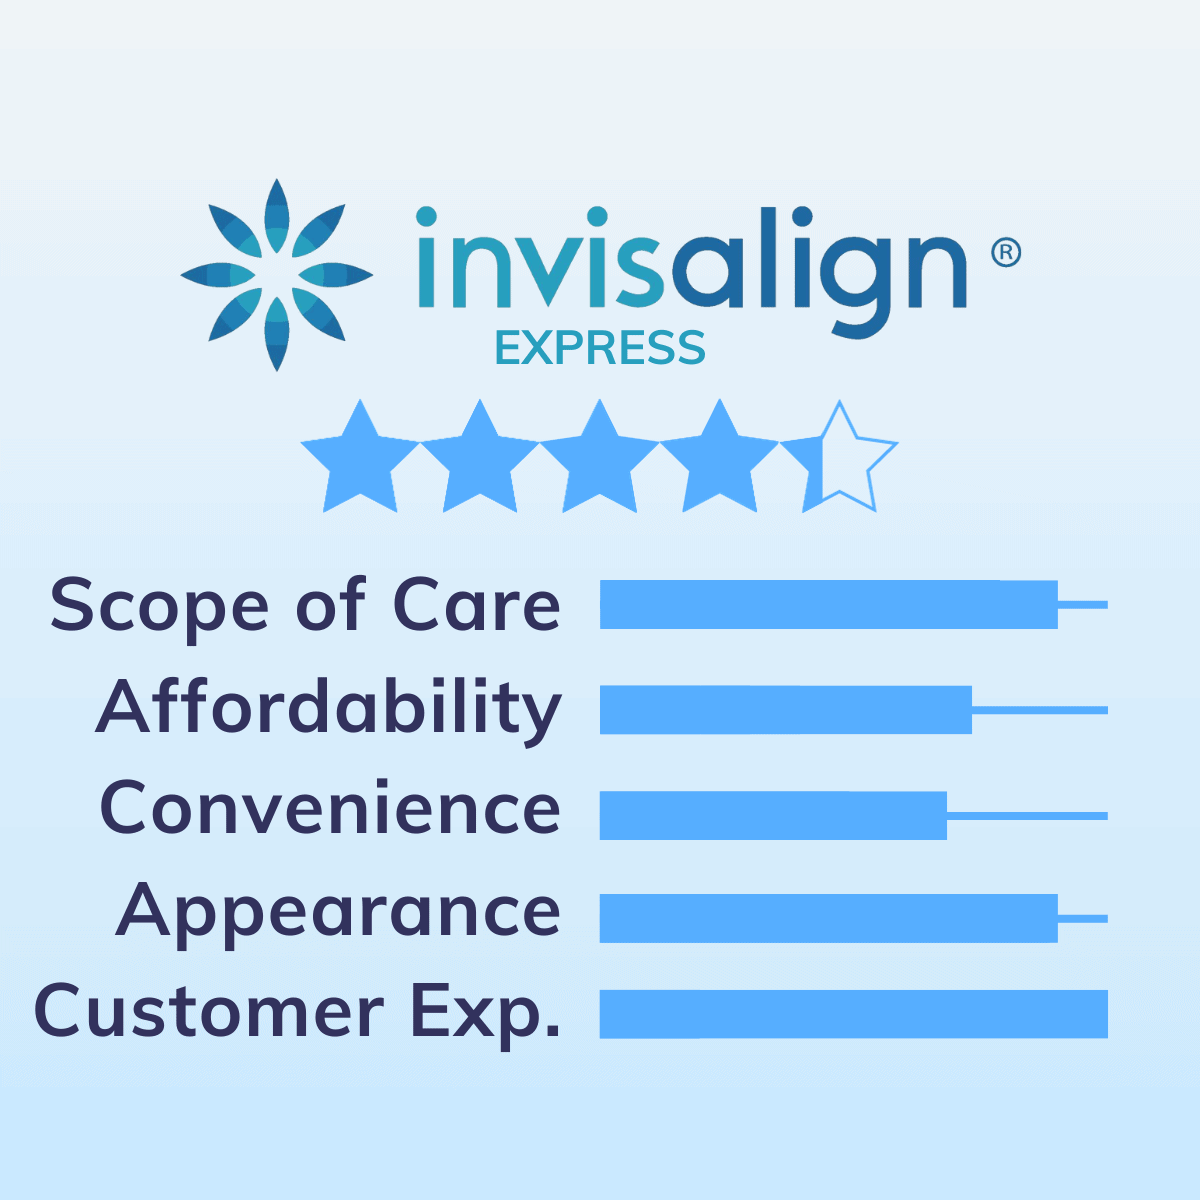 Invisalign Express Review Rankings